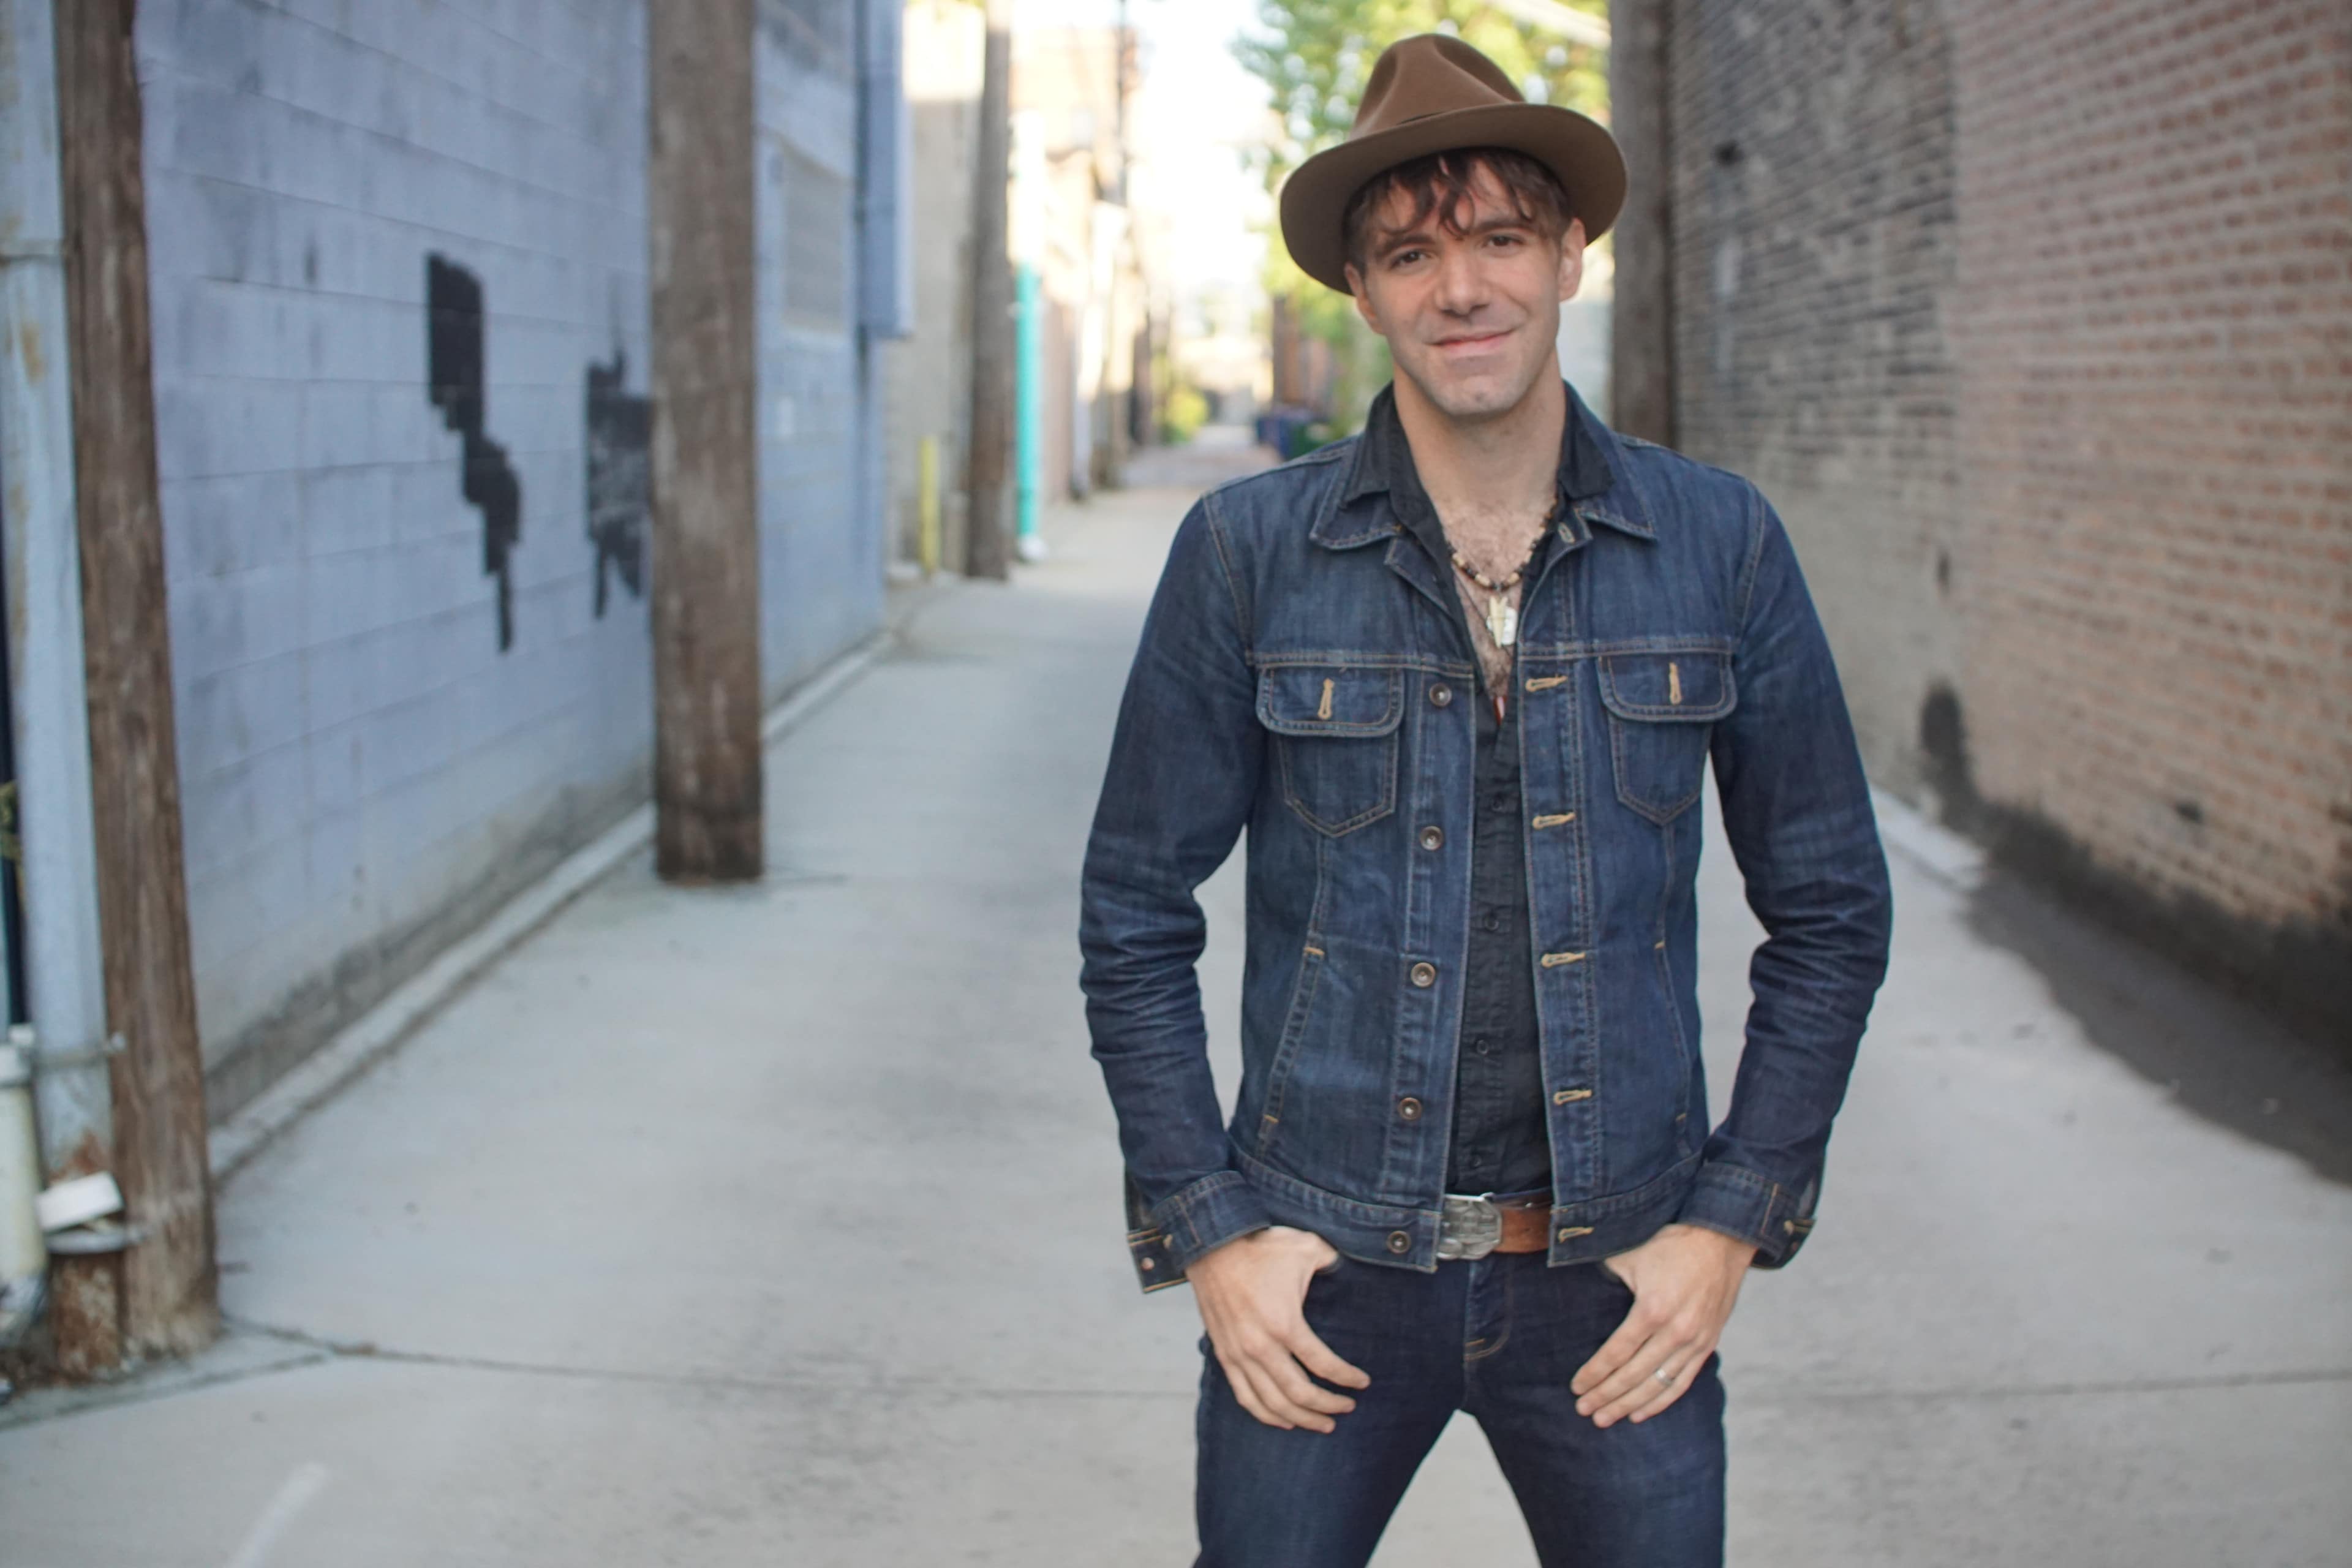 Stephen Kellogg Previews Objects In The Mirror With New Track “High Highs, Low Lows”